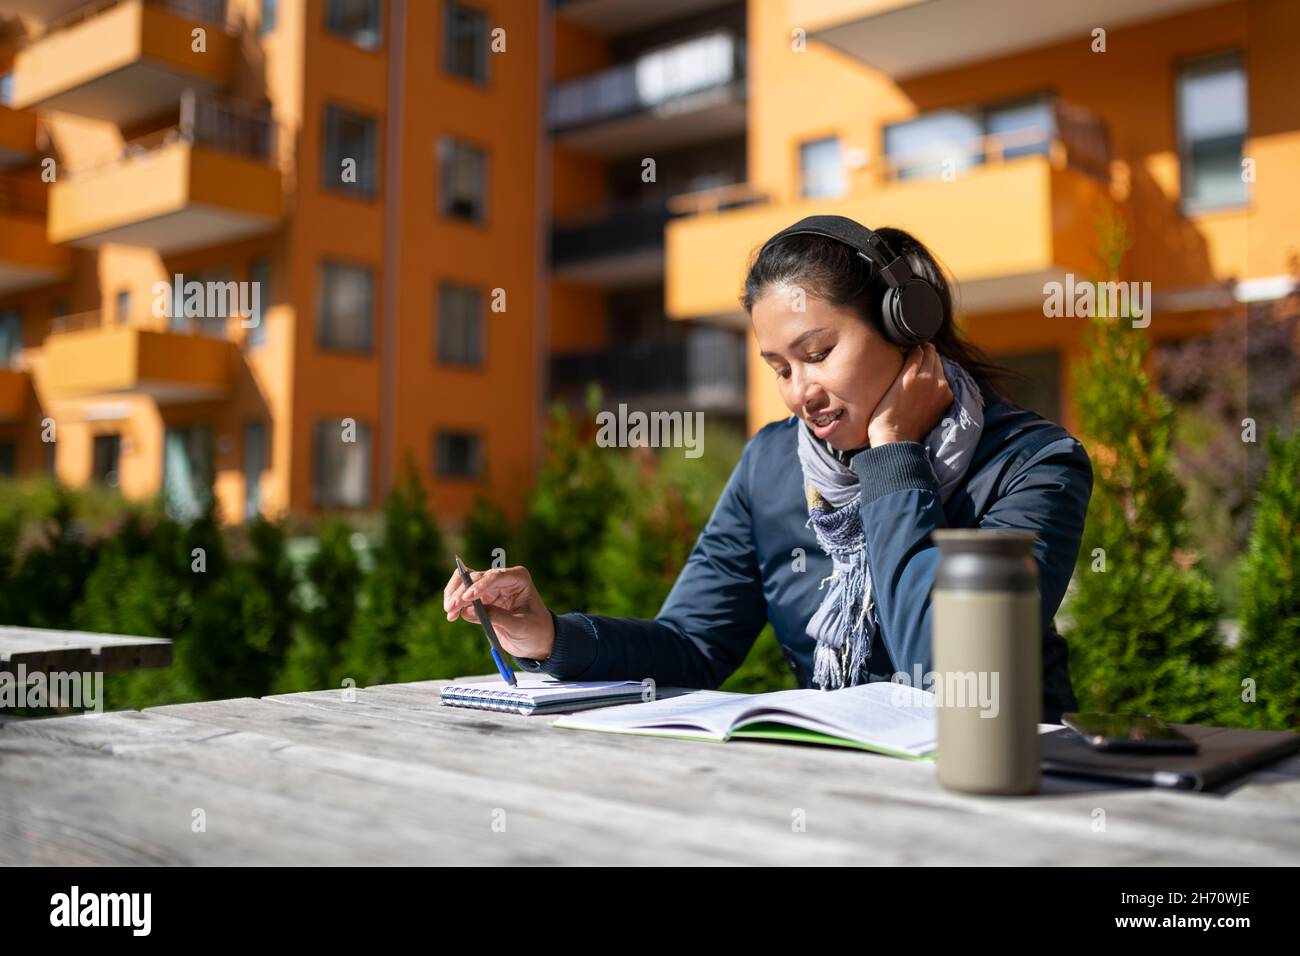 Young woman learning at courtyard Stock Photo